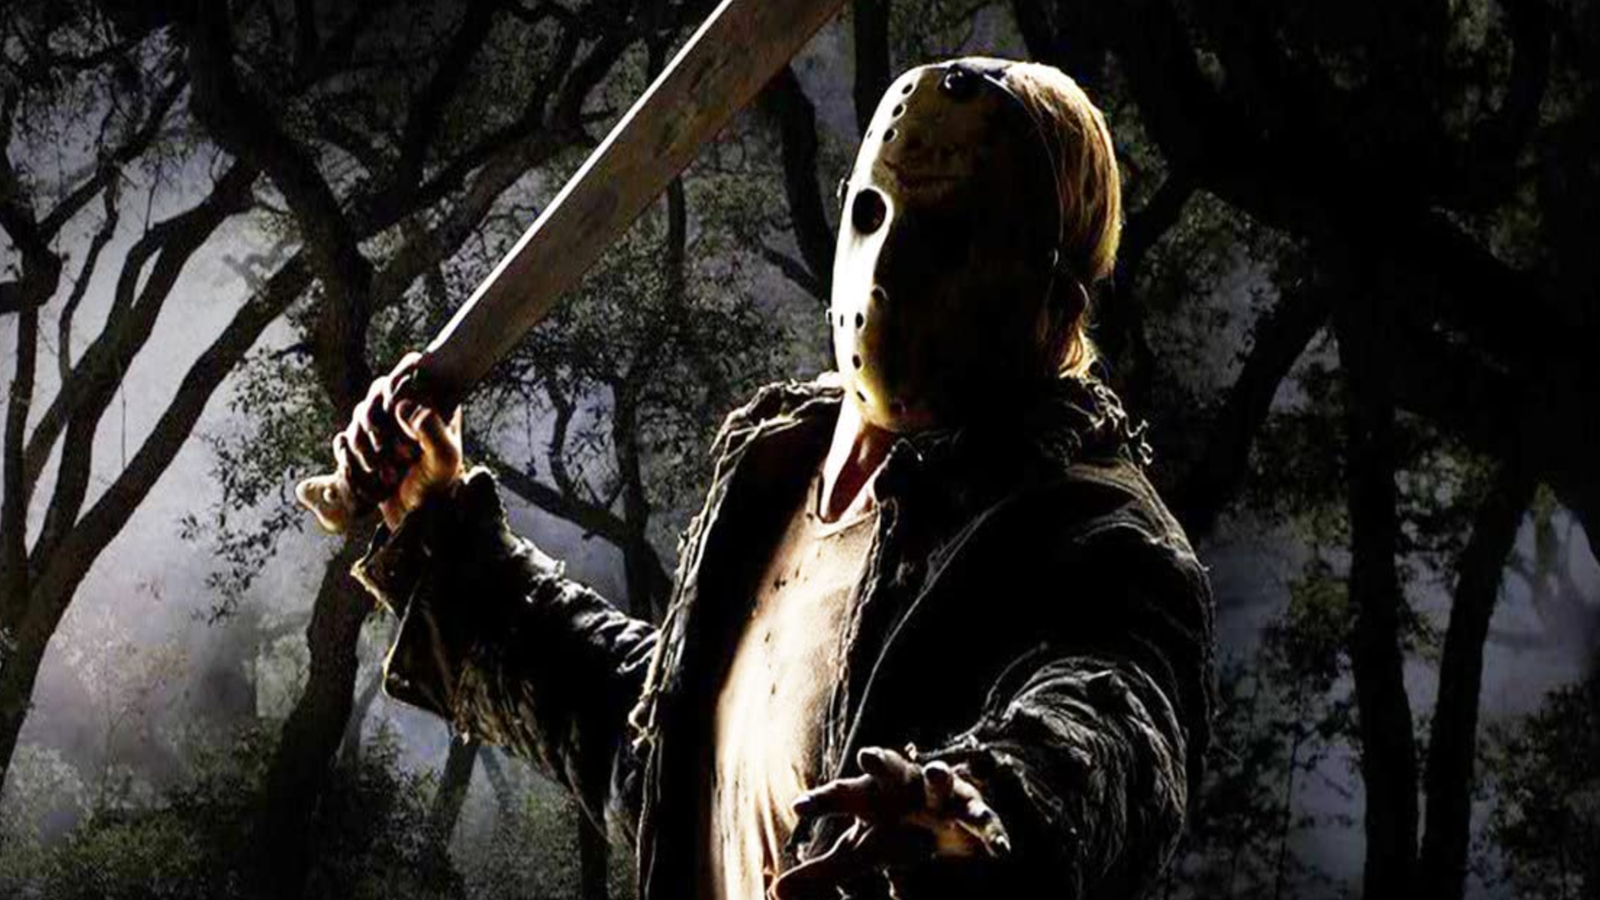 If one studio was to make another Friday the 13th game, I'd love